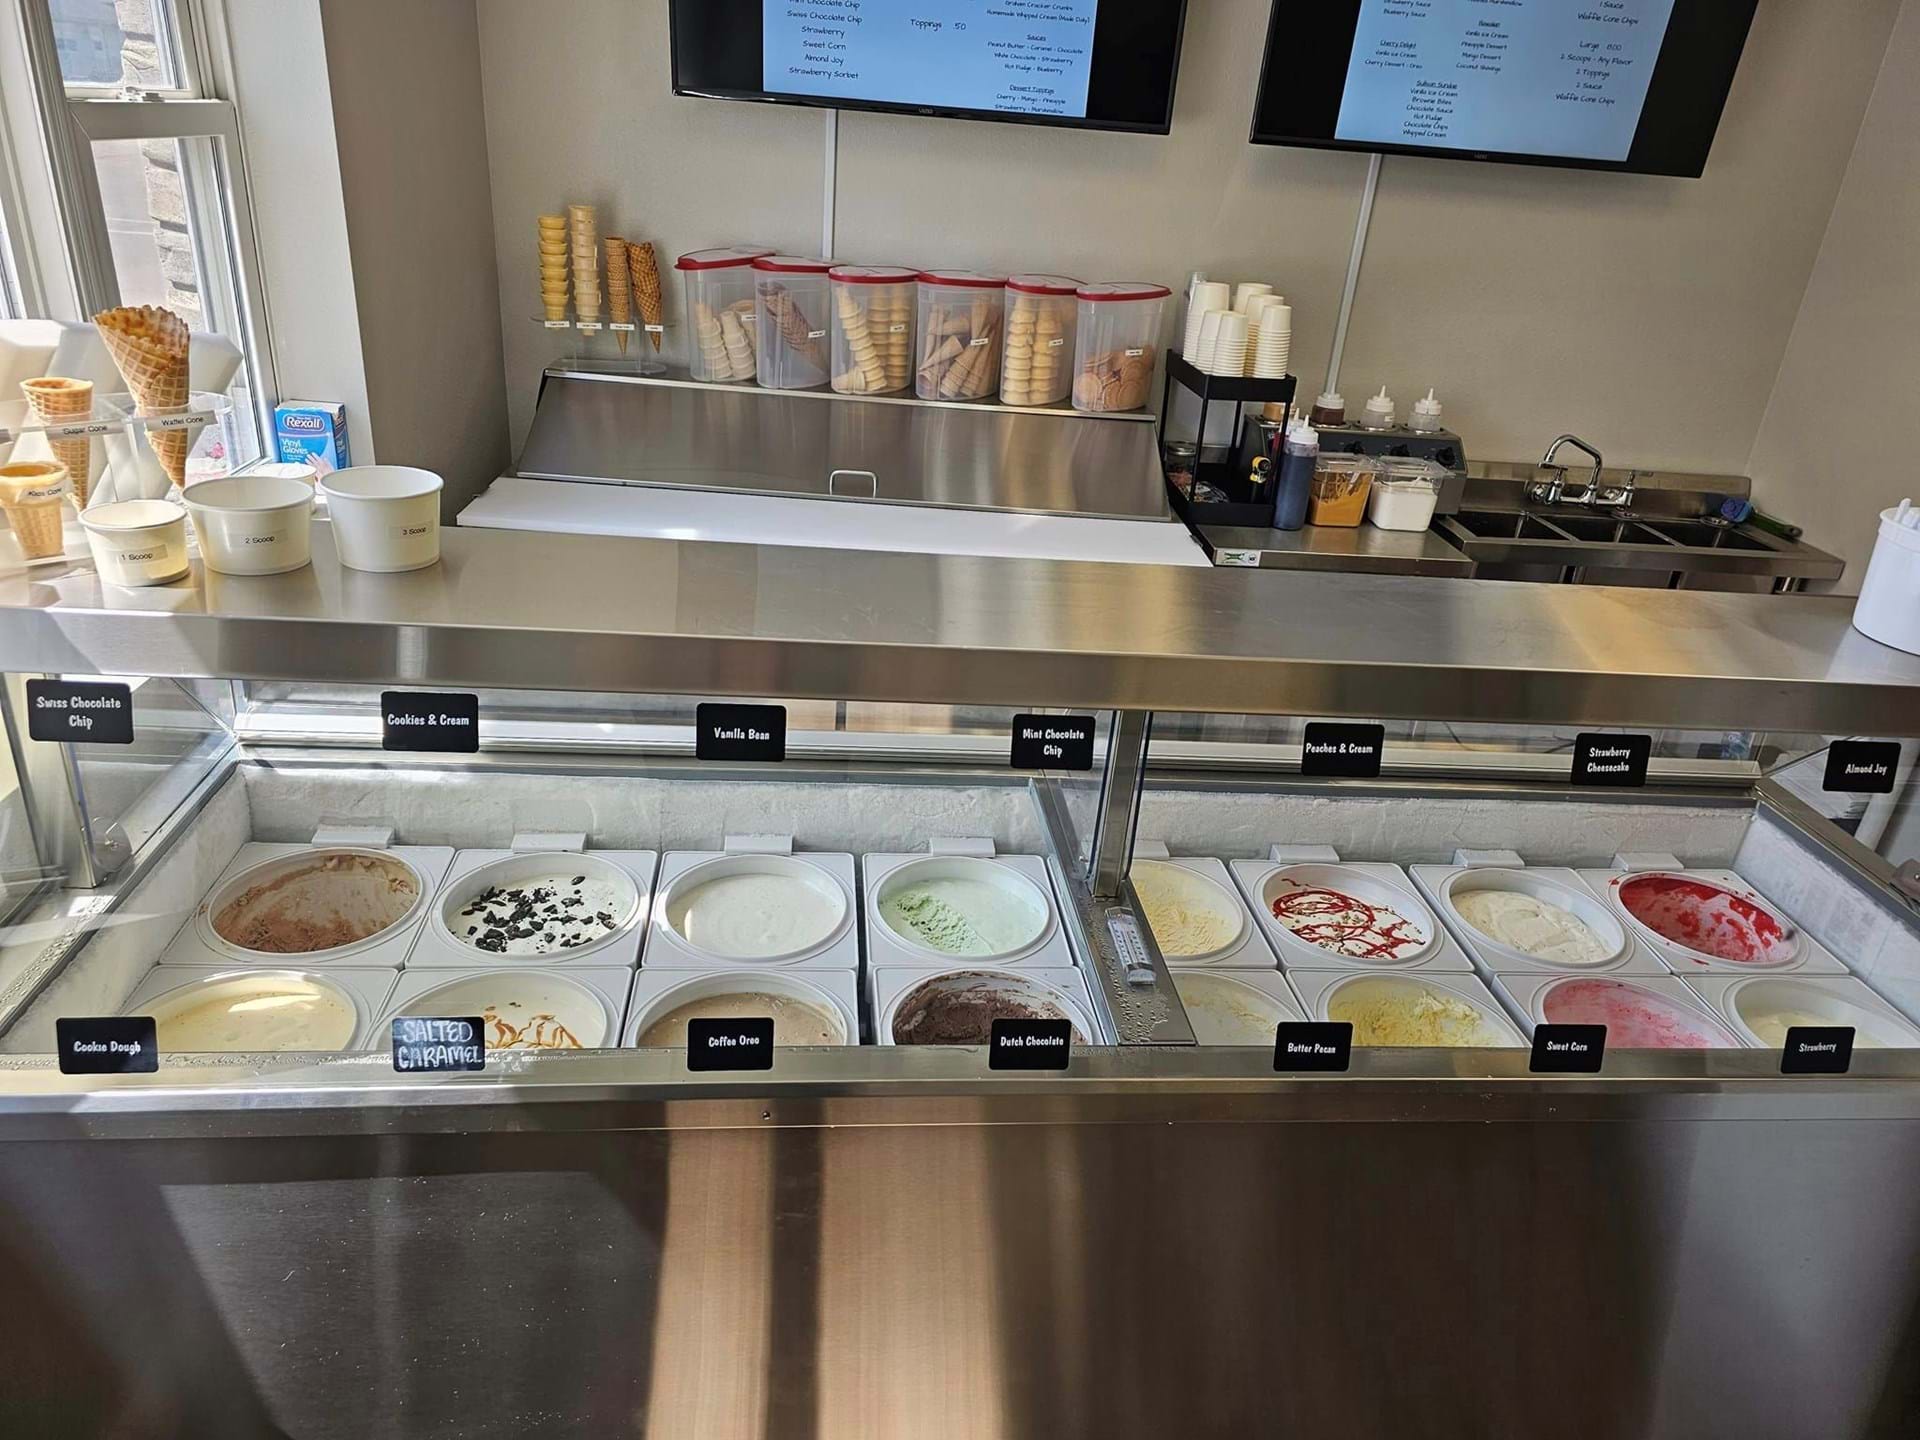 Our Ice Cream Display